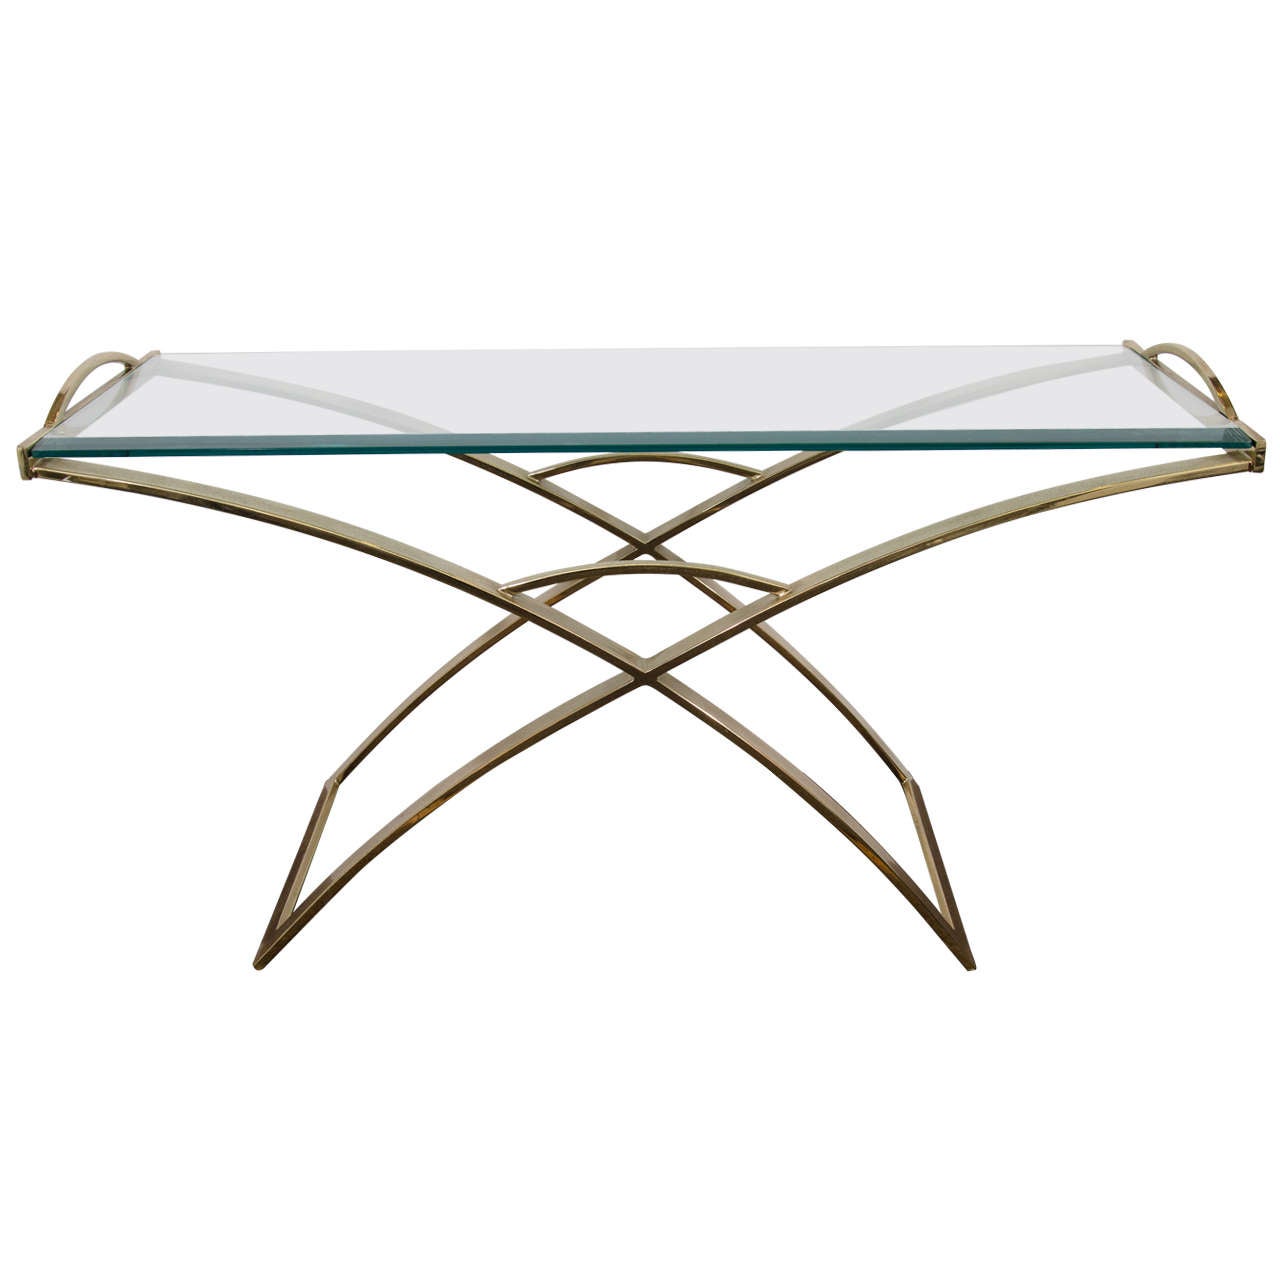 A Midcentury Curved Brass X-Base Console Table with Handles